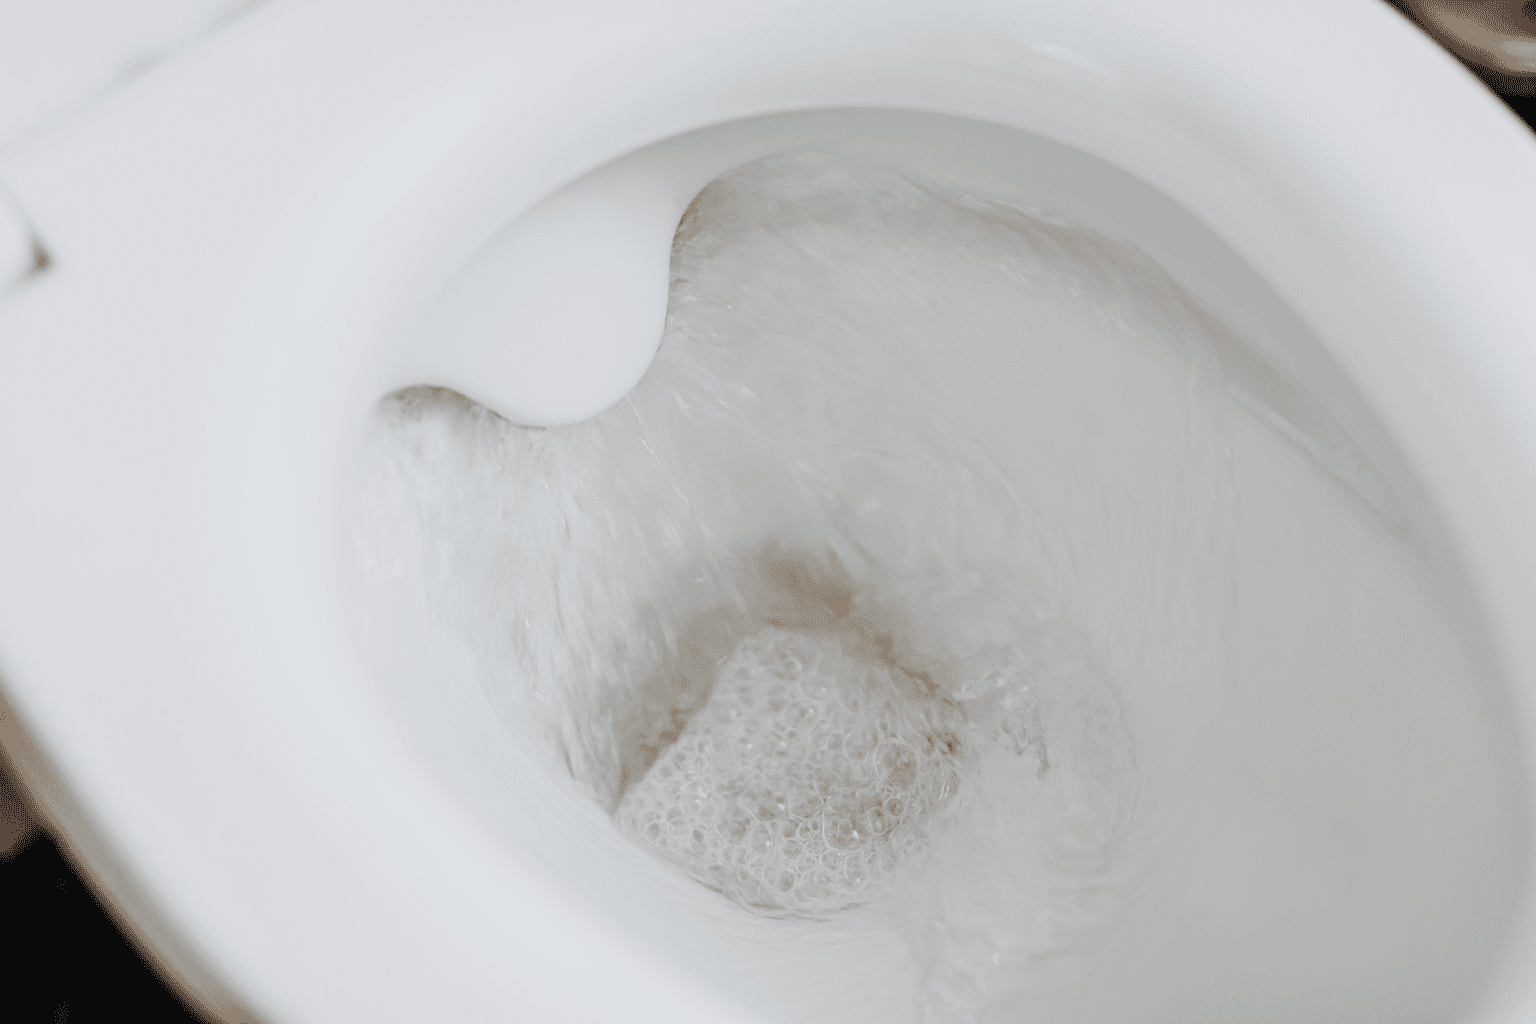 Your toilet can easily clog when you flush things you shouldn't 